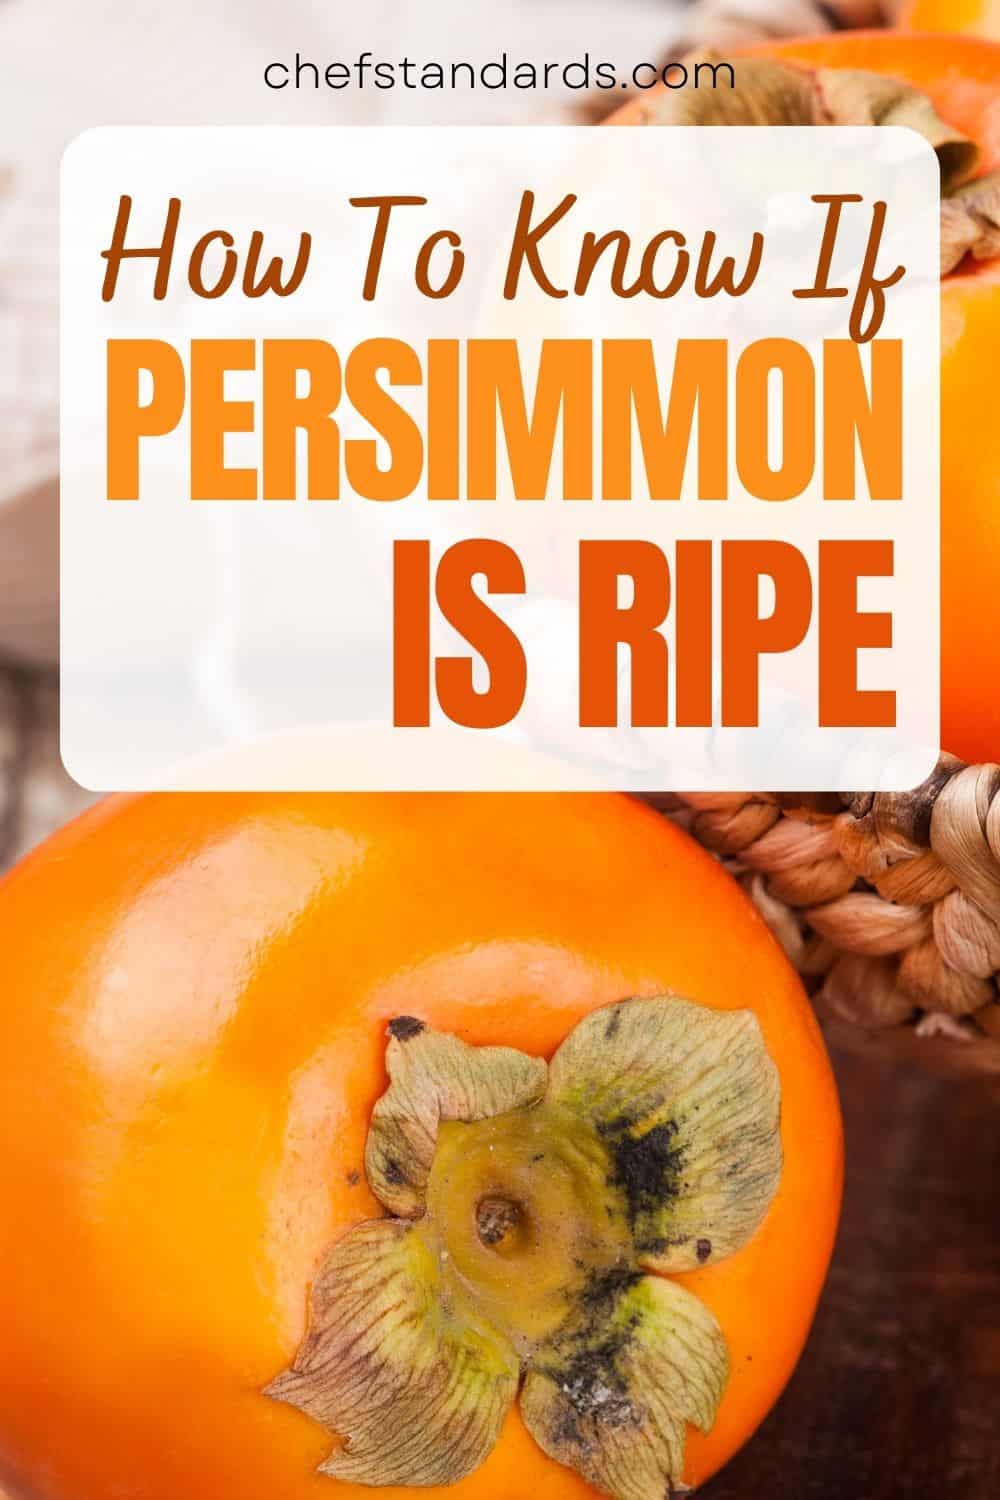 When Is A Persimmon Ripe And How To Use It
